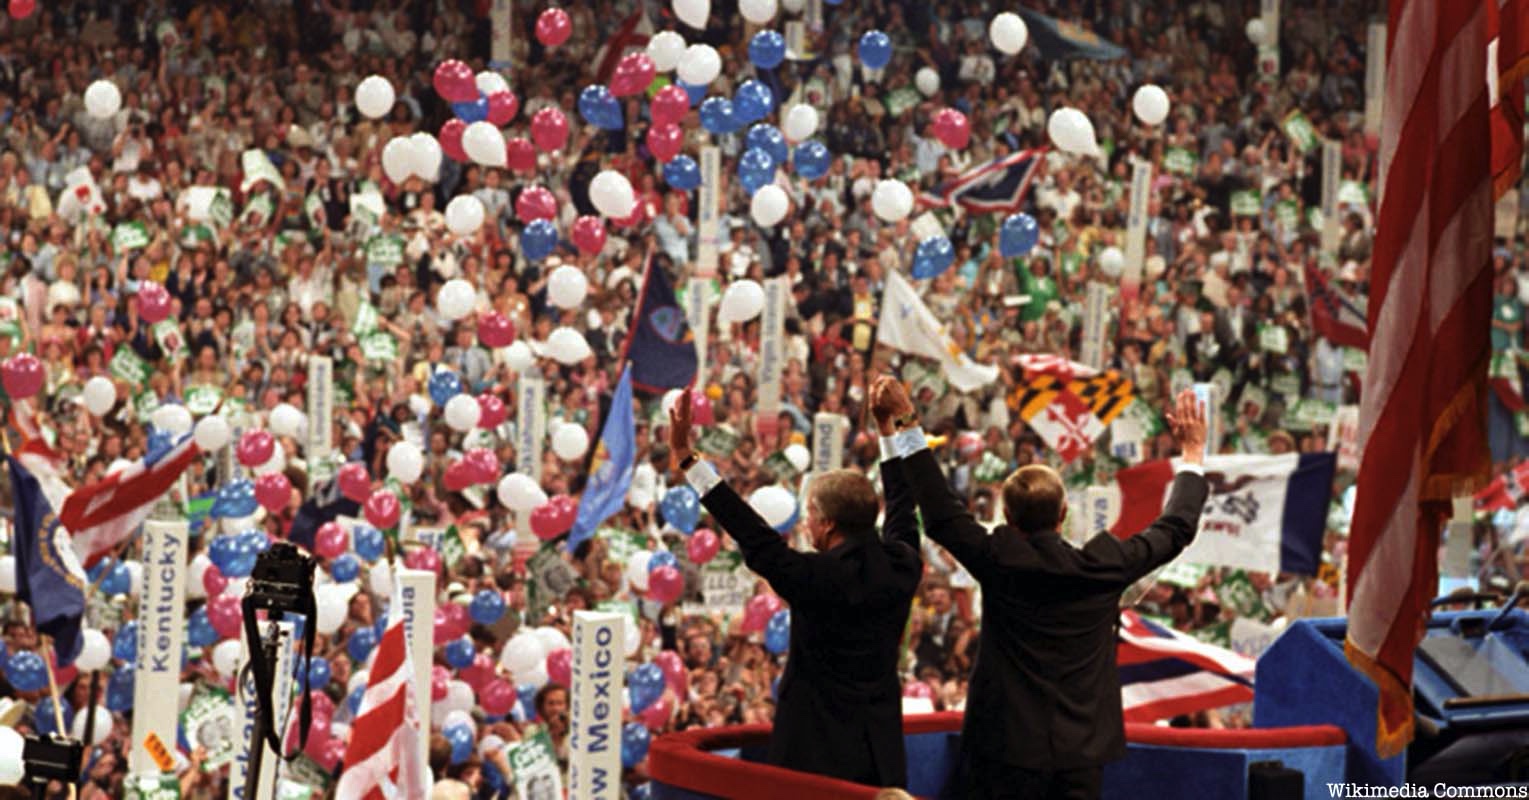 Jimmy Carter and Walter Mondale At The 1980 Democratic National Convention